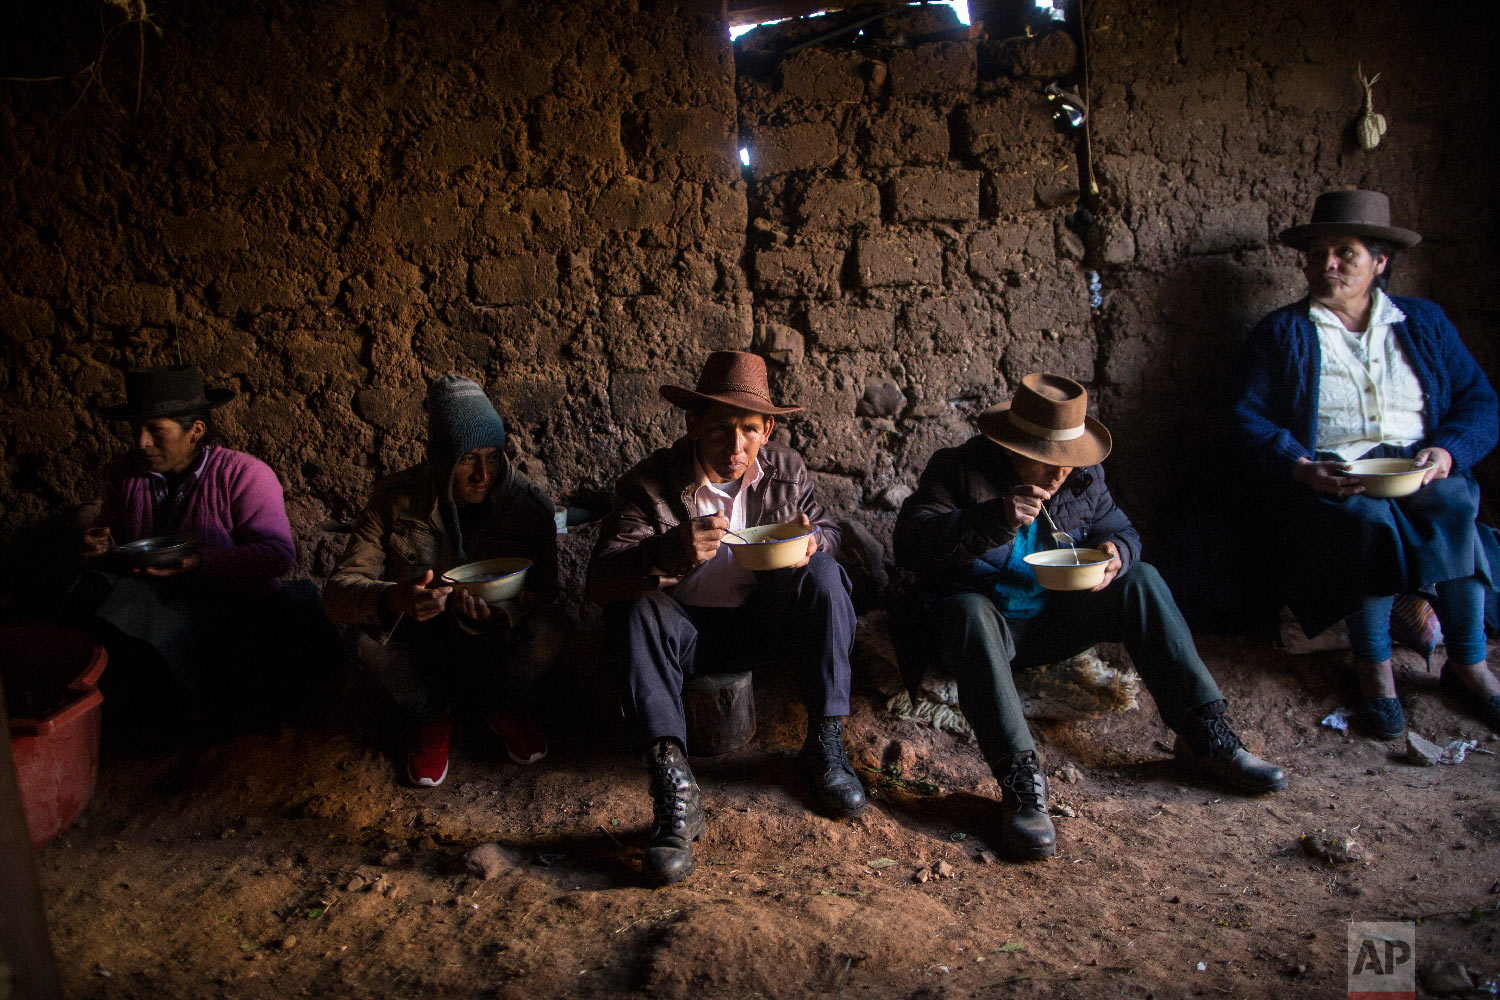  In this Aug. 15, 2018 photo, villagers eat breakfast before giving a proper burial to their loved ones who were killed by Shining Path guerrillas and the Peruvian army in the 1980s, in Quinuas, in Peru's Ayacucho province. (AP Photo/Rodrigo Abd) 